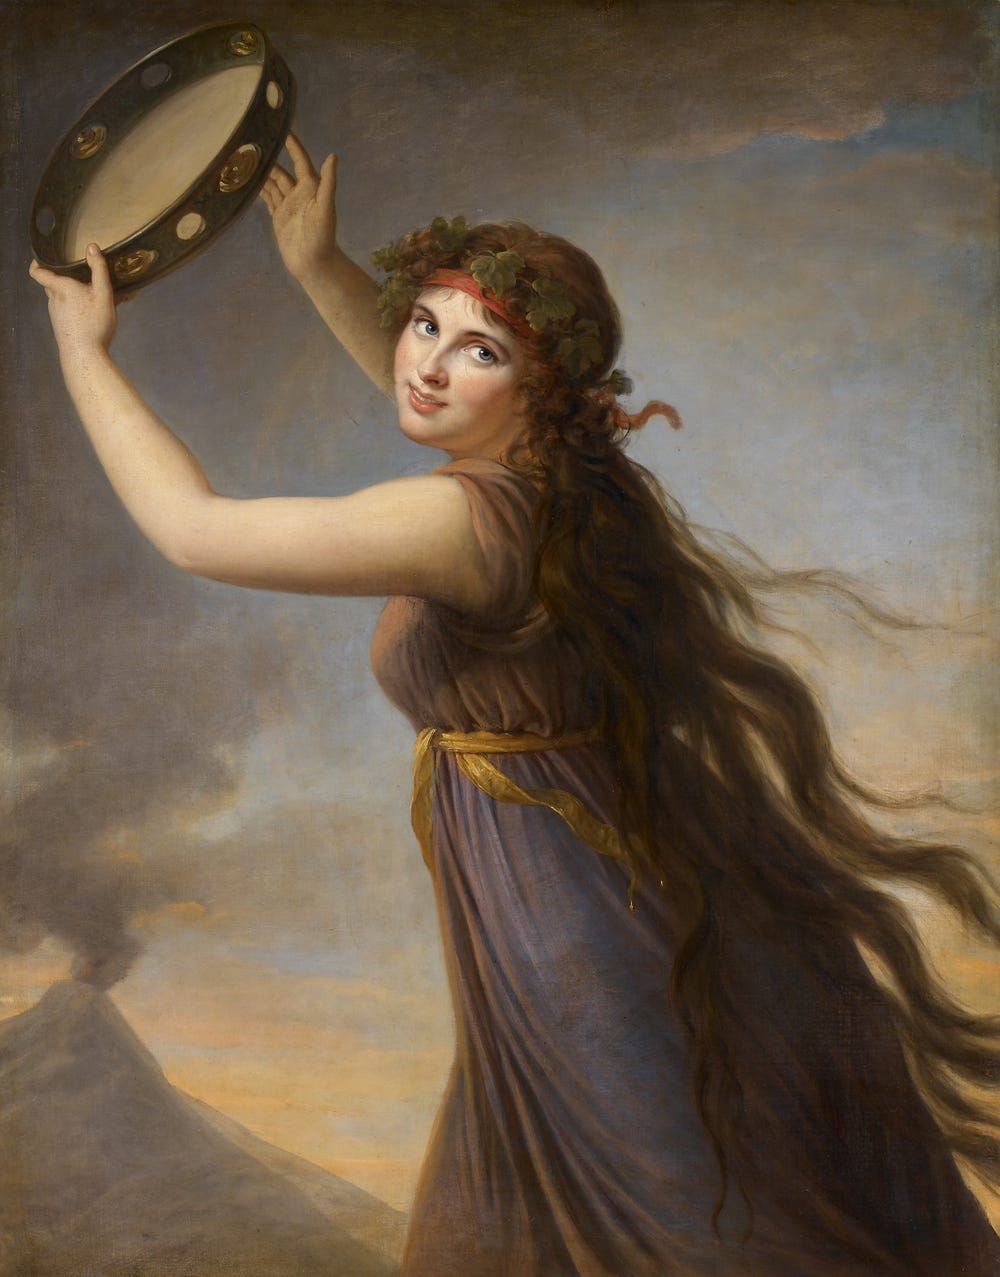 portrait of a woman with brown hair playing a tambourine